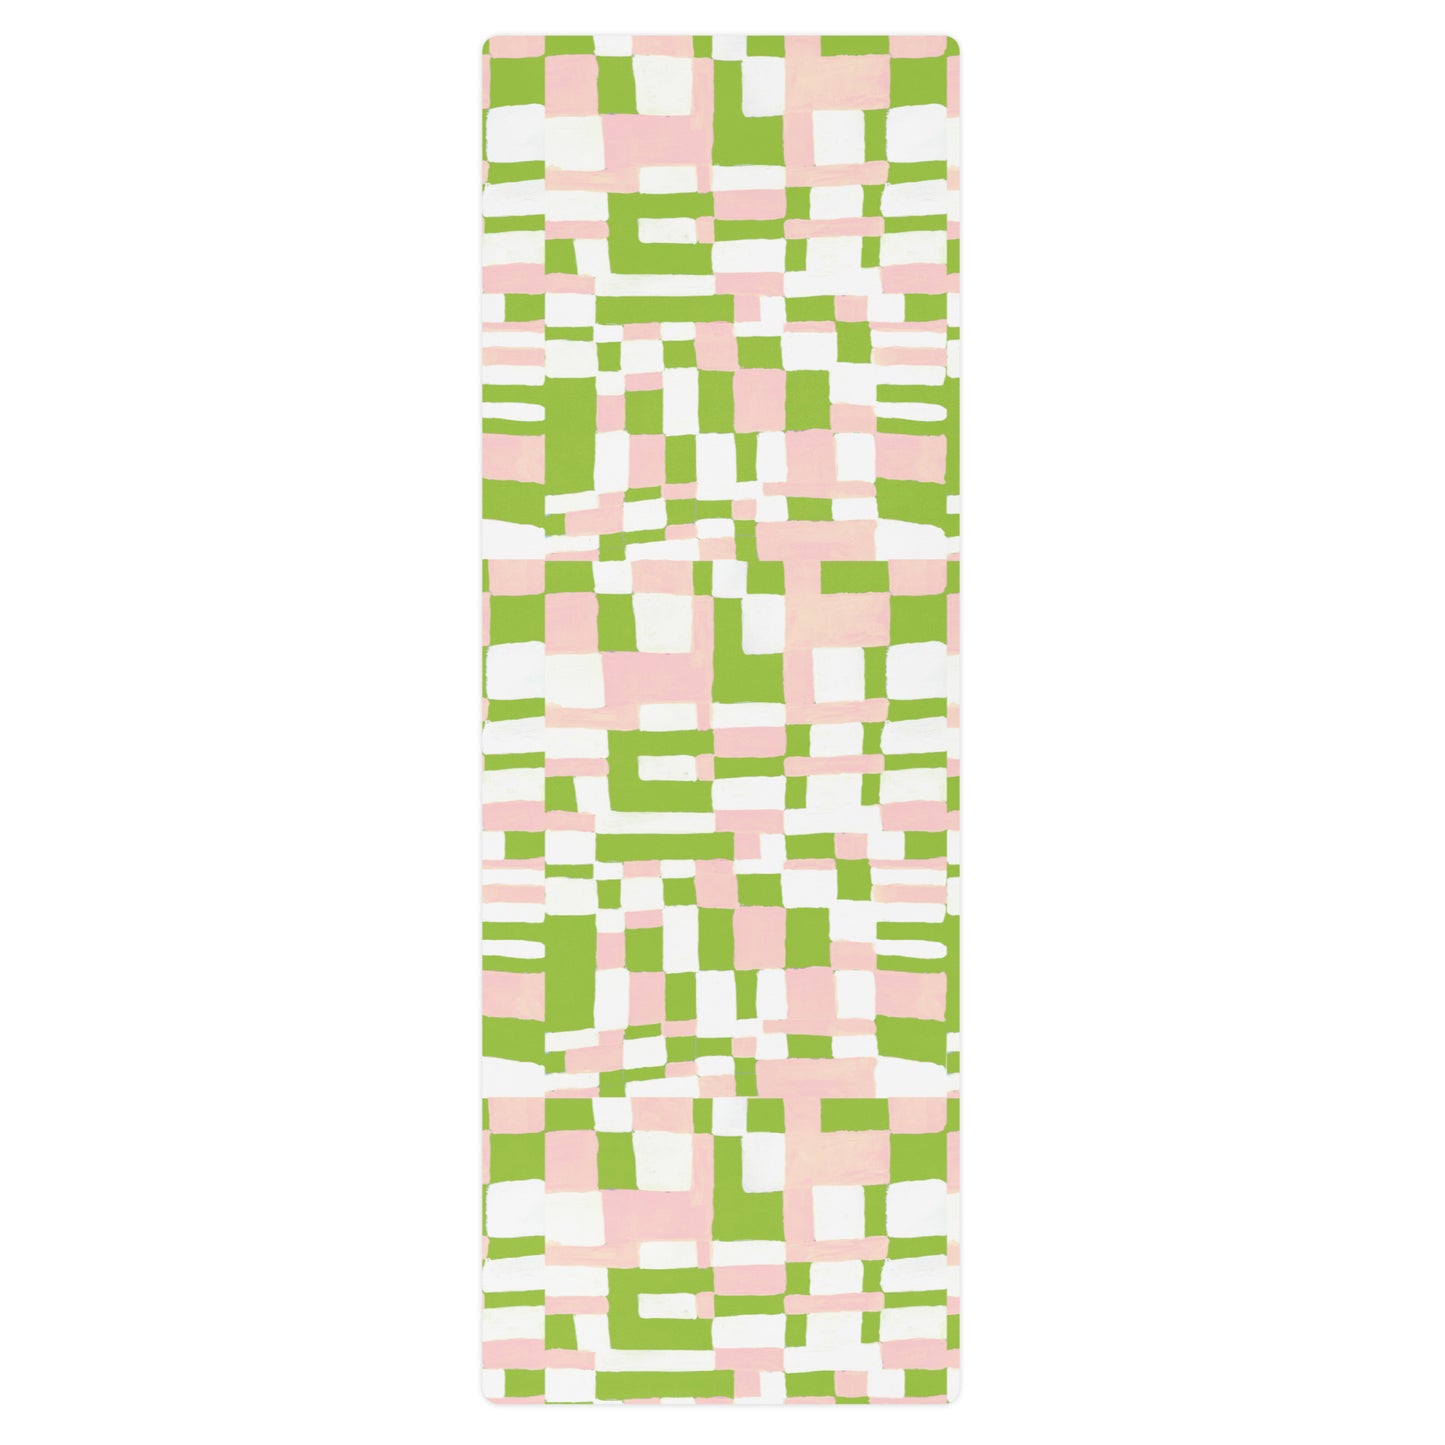 Checkered Yoga mat in Green and PInk